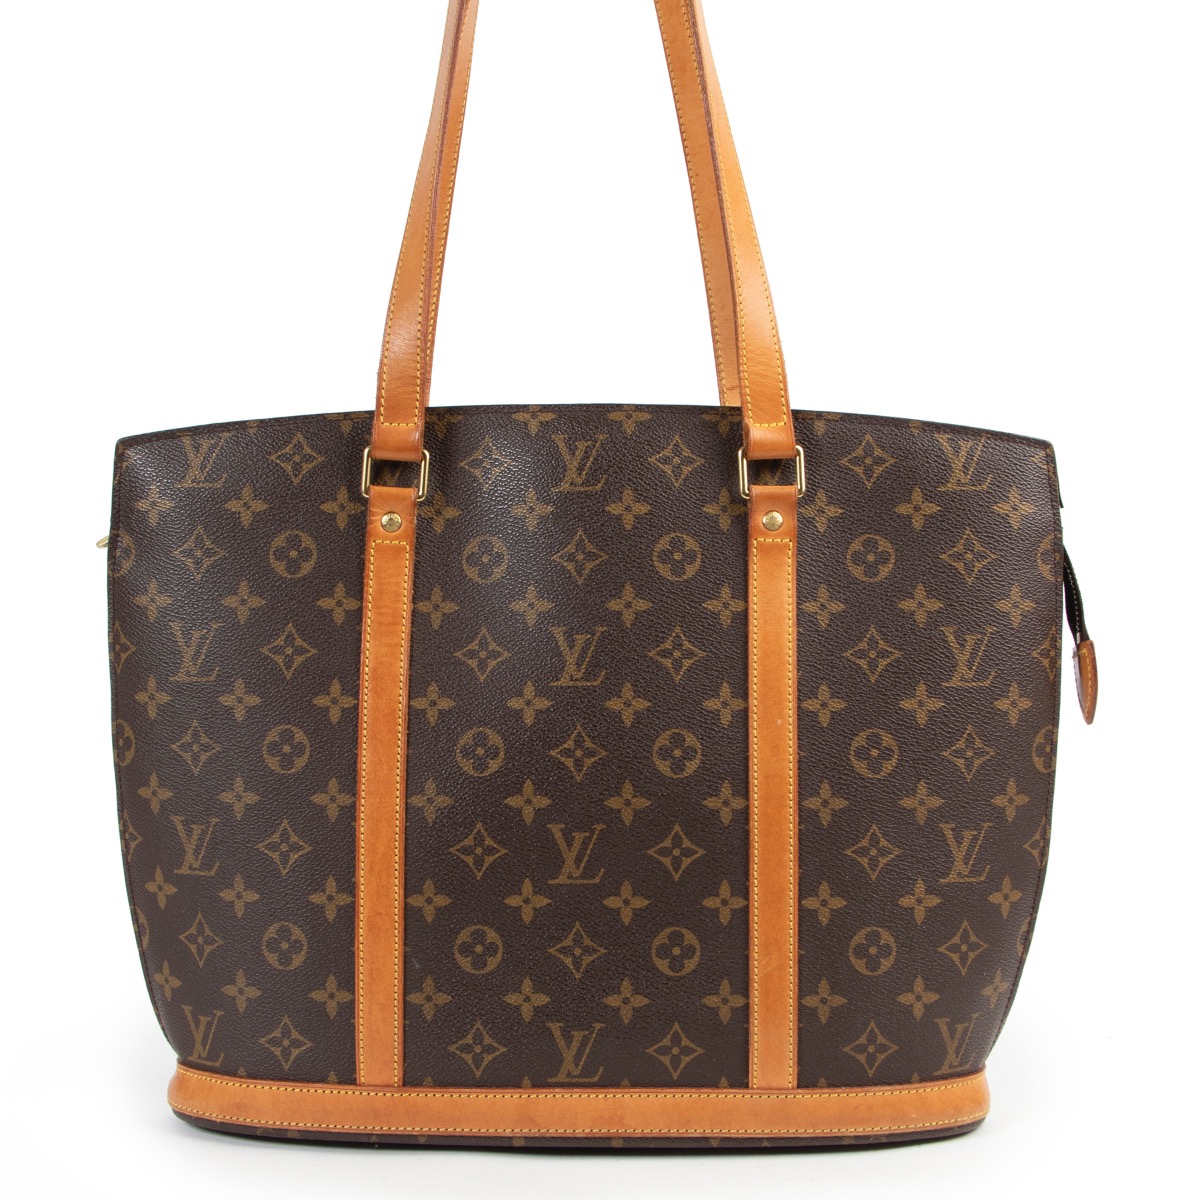 Louis Vuitton Babylone Bag Tote Brown Canvas MB0949 Authentic